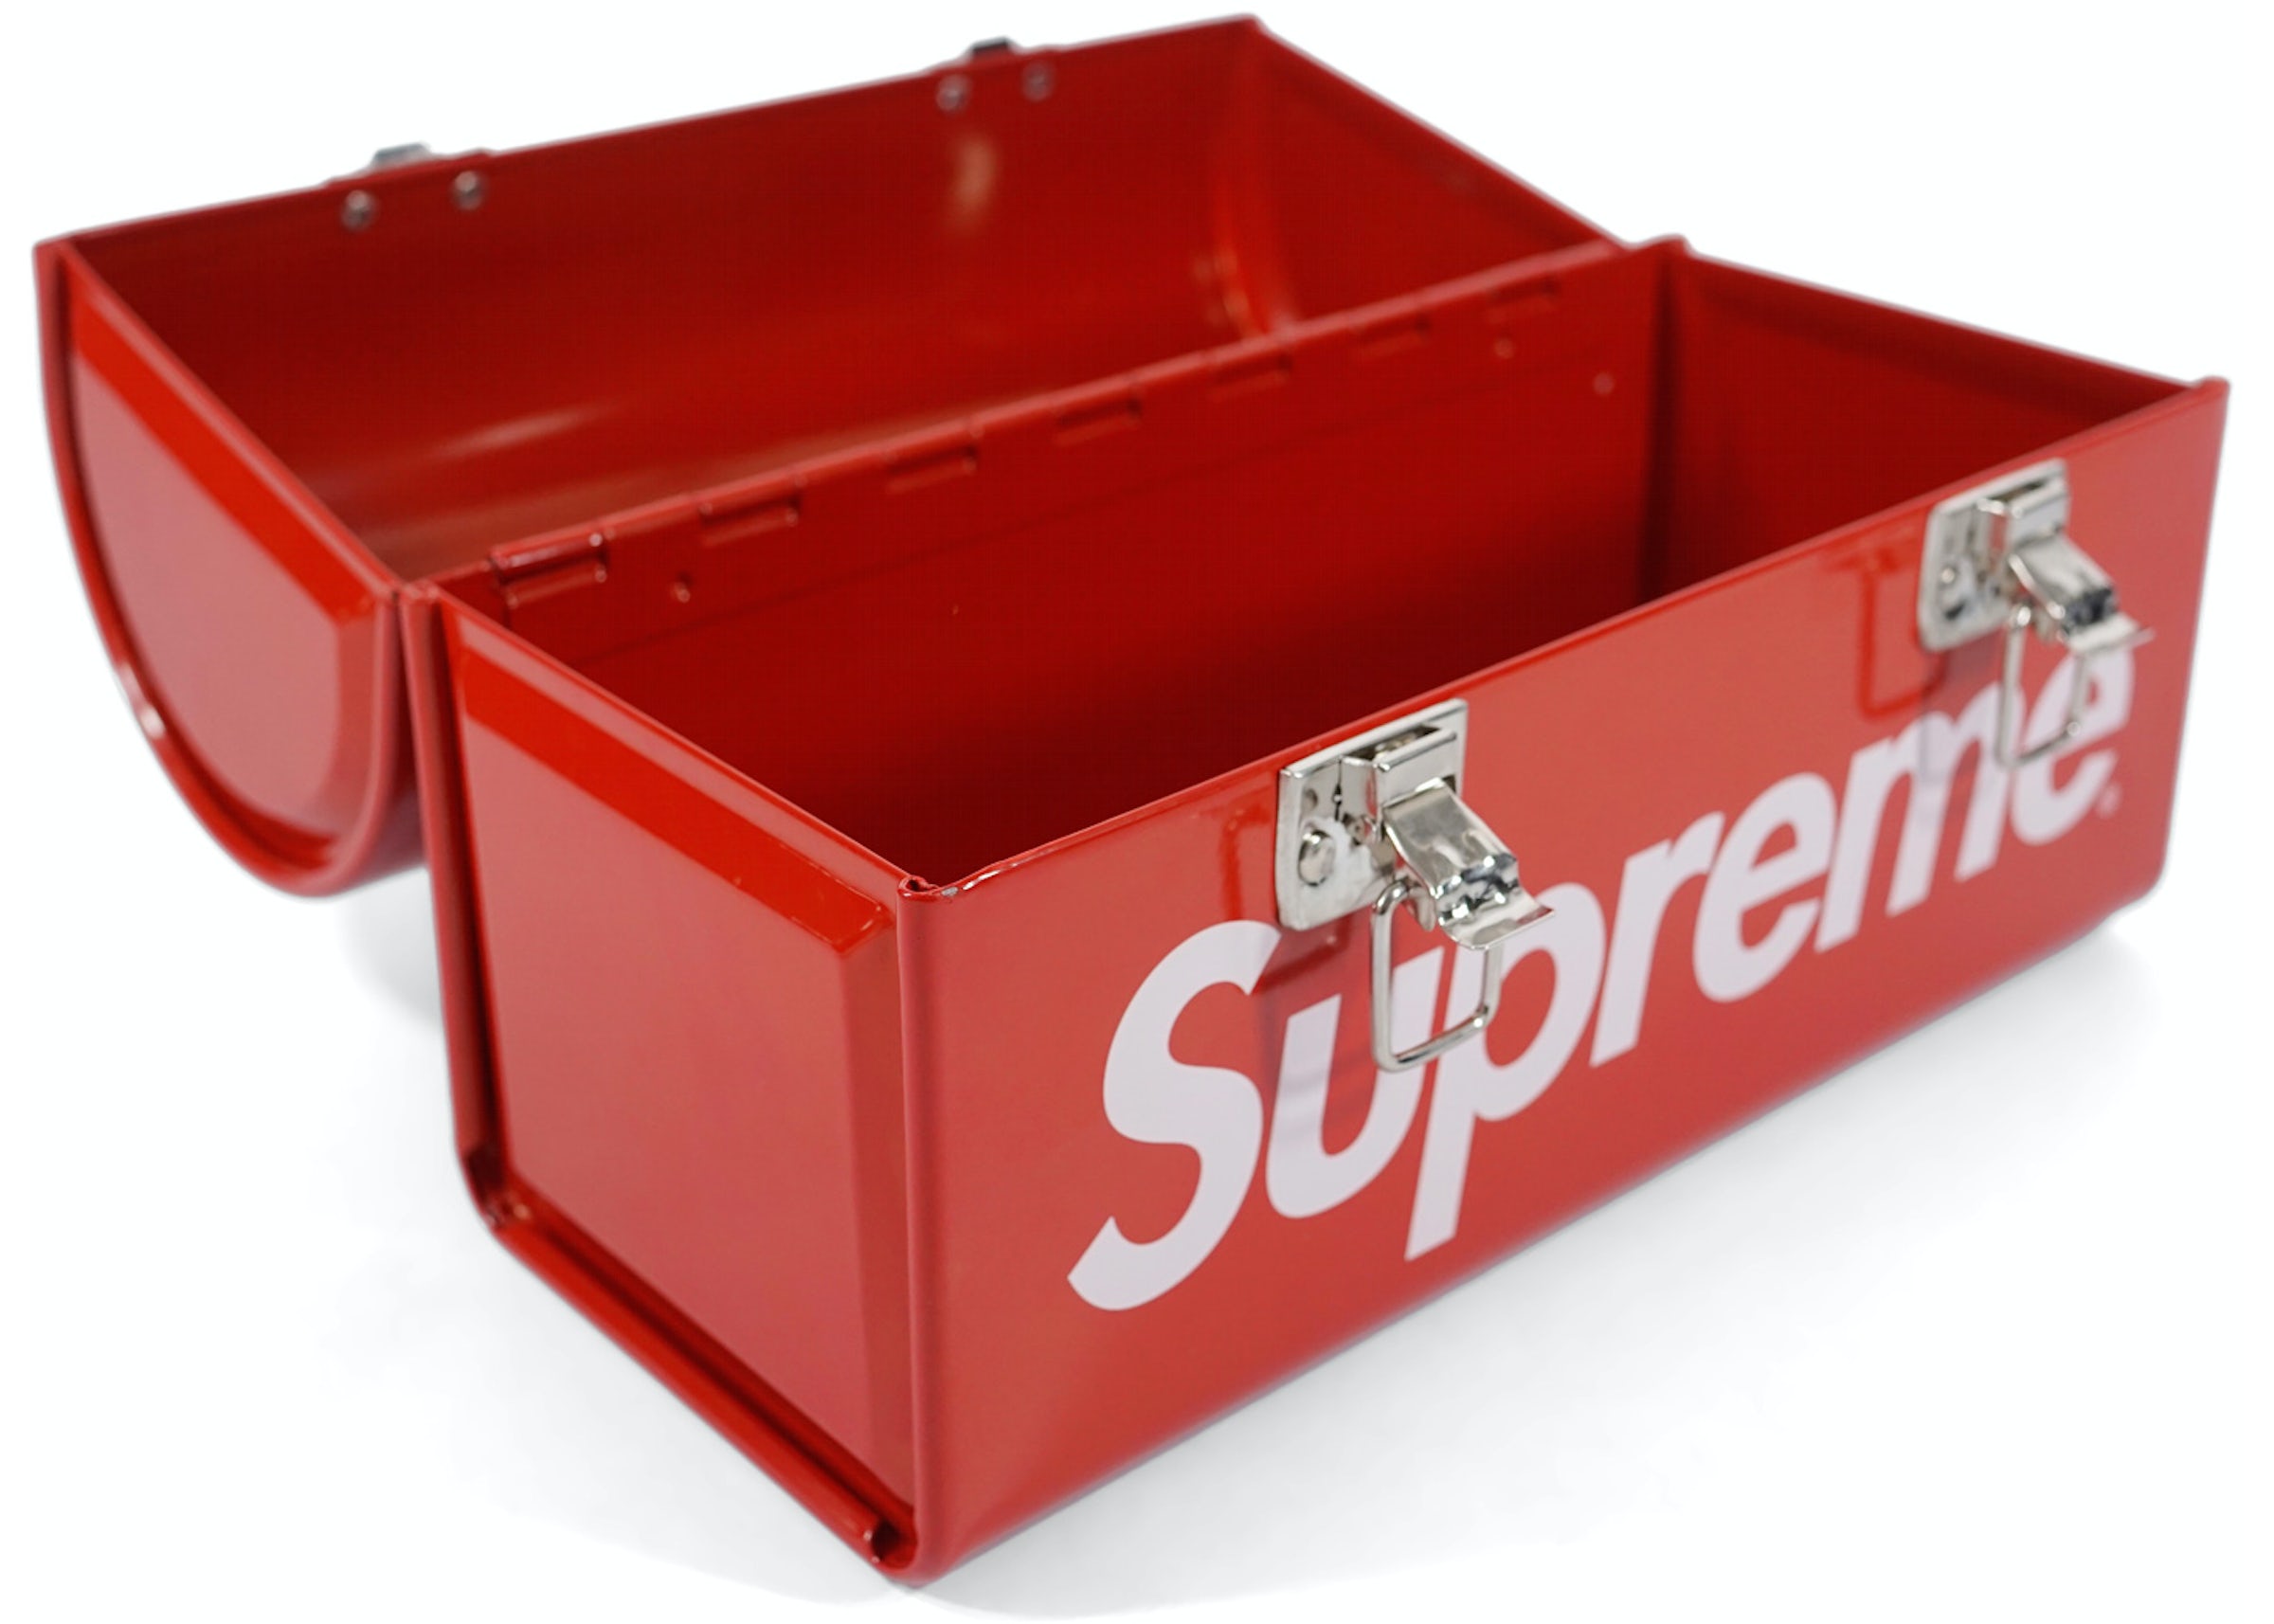 Supreme Metal Lunch Box Red - FW15 - US